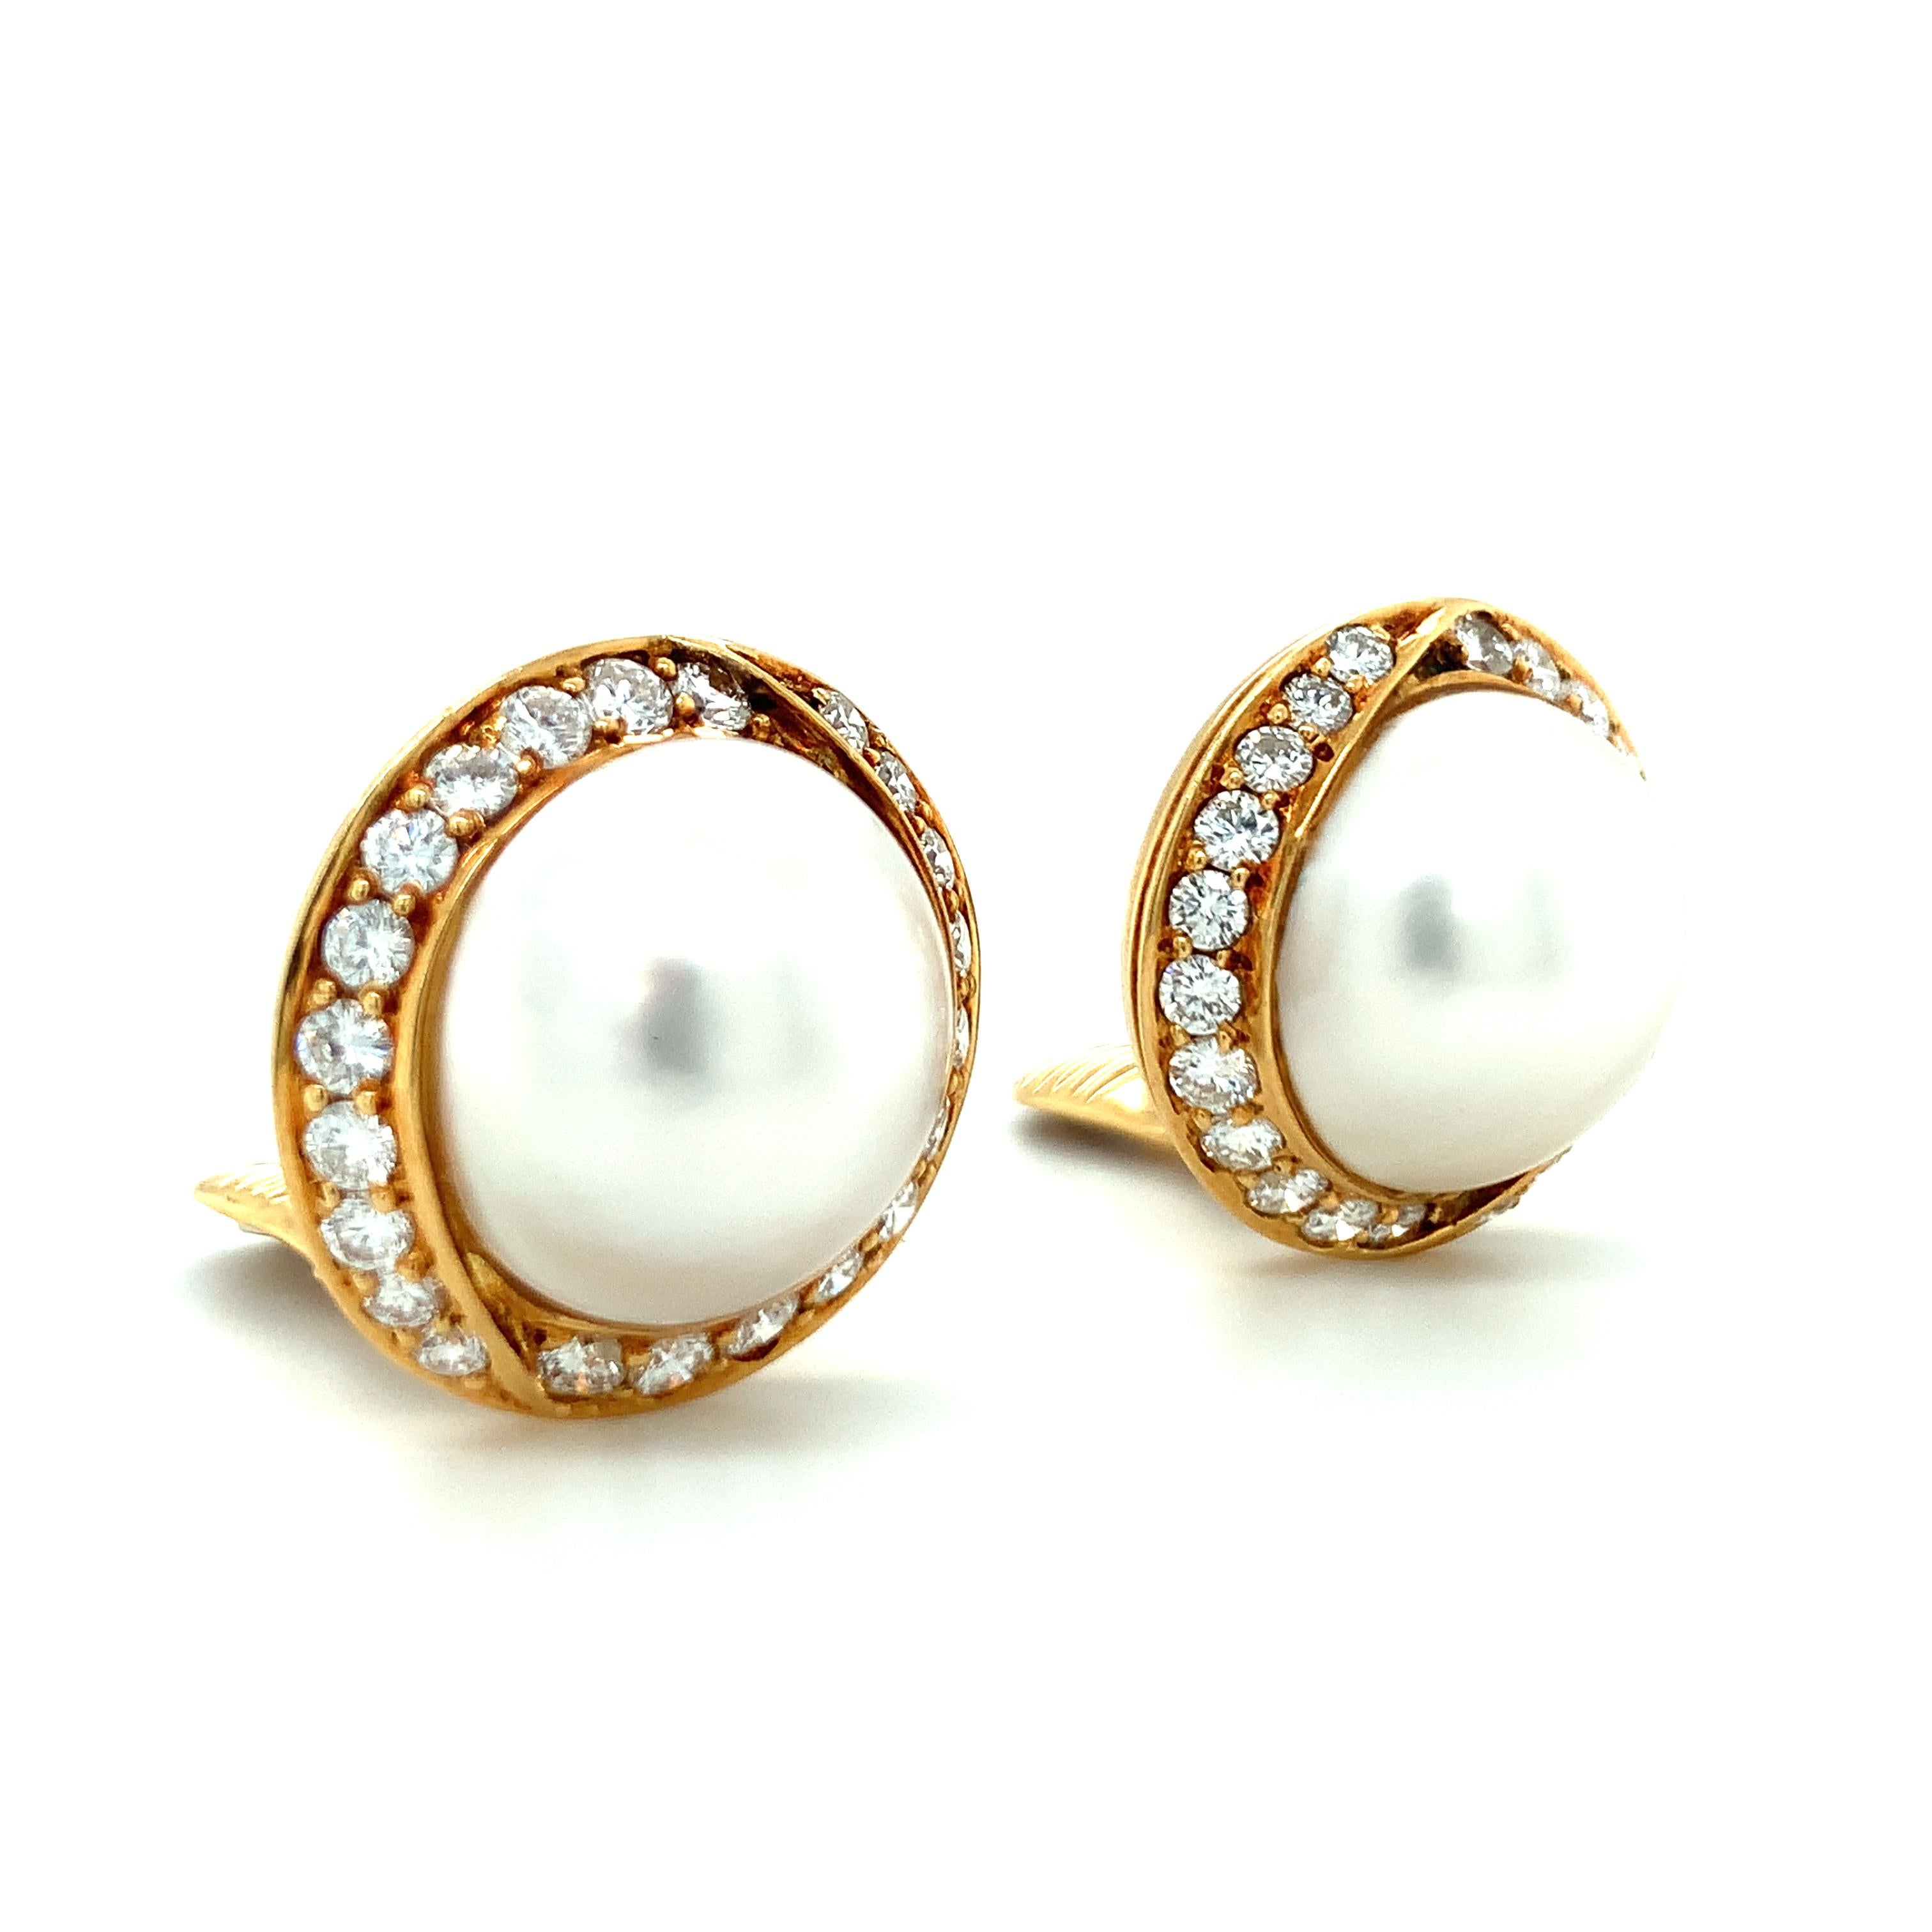 One pair of white mabe cultured pearl and diamond 18K yellow gold earclips featuring two pearls measuring 17 millimeters in diameter with a diamond border totaling 44 round brilliant cut diamonds weighing 2.50 ct. with G color and VS-1